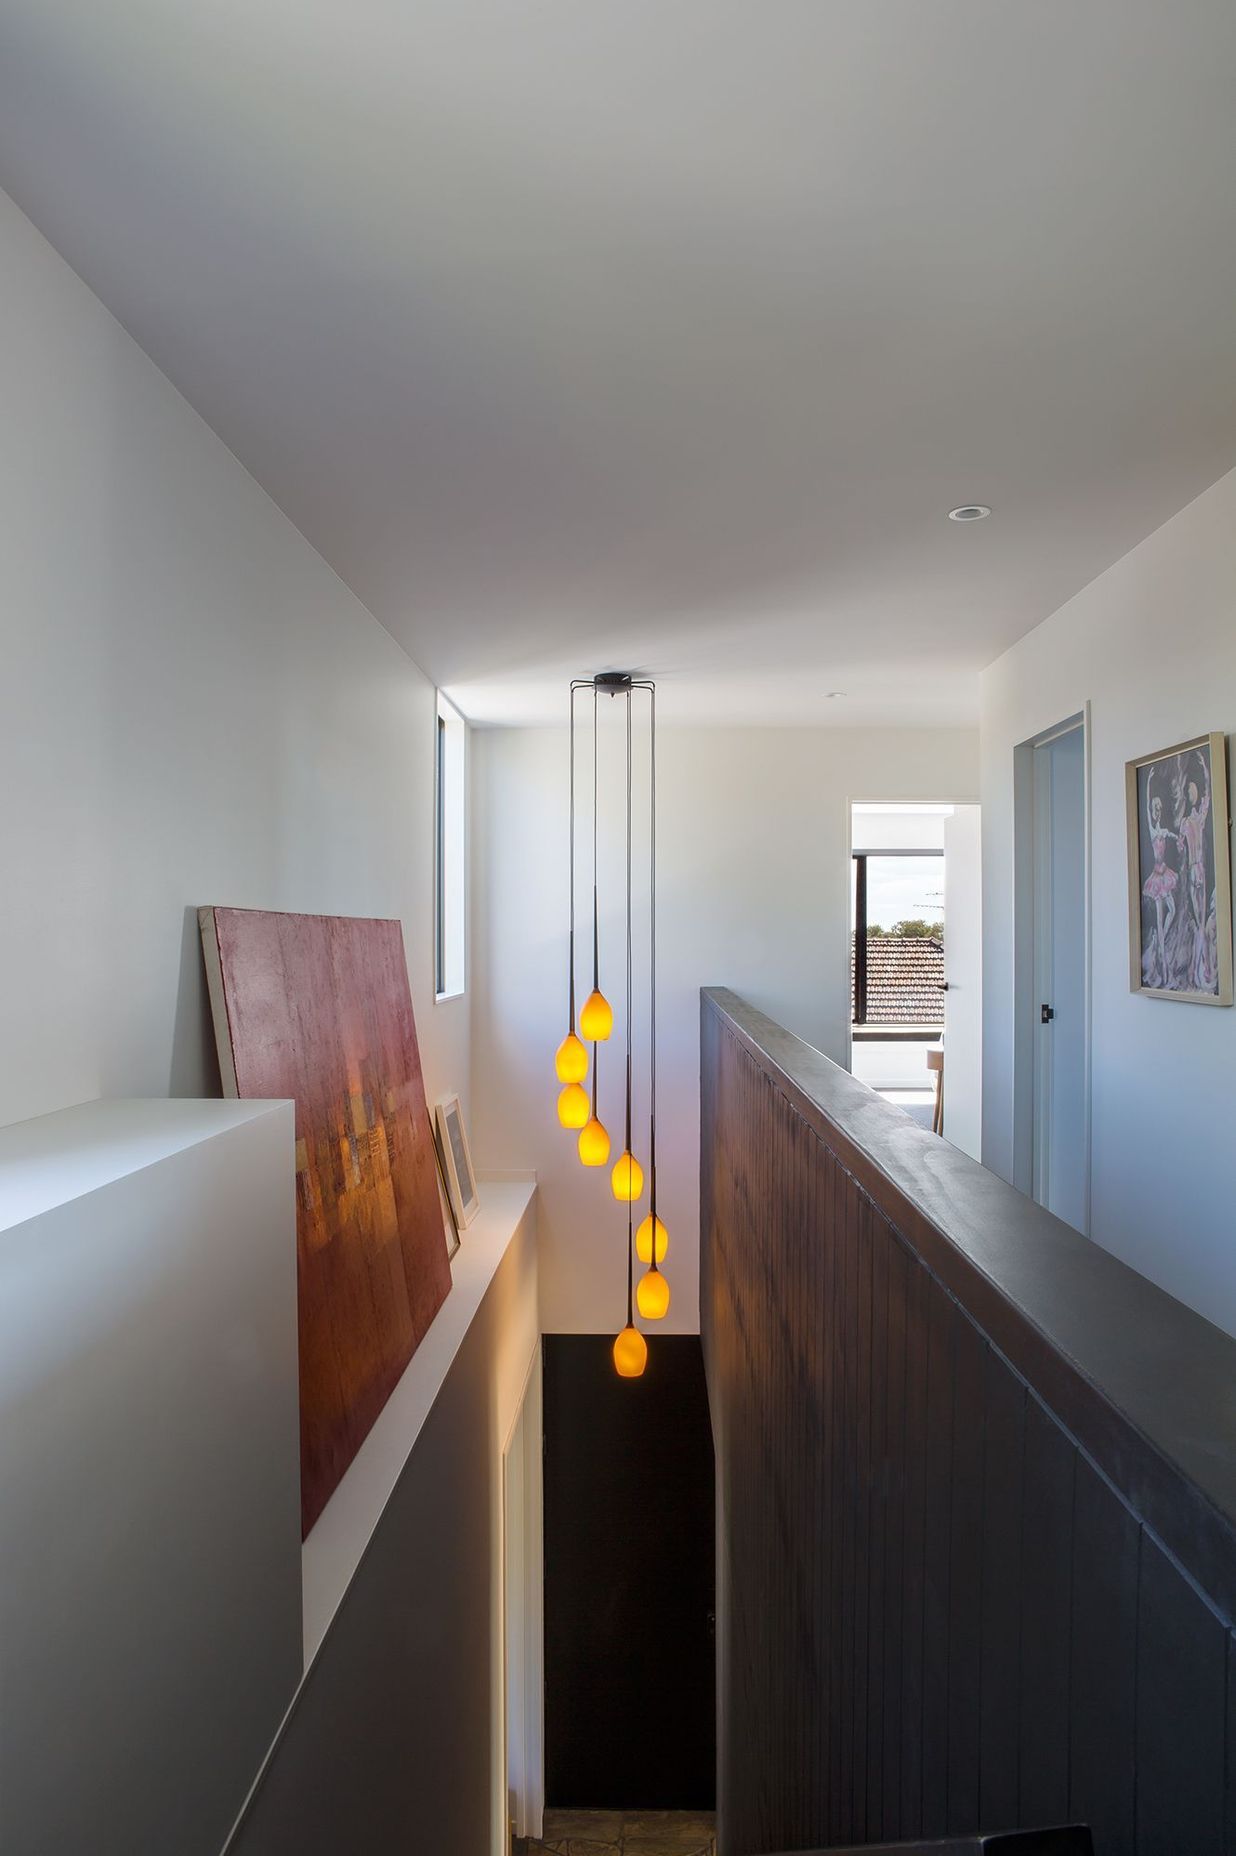 Artworks and a feature light take centre stage in the double-height staircase.